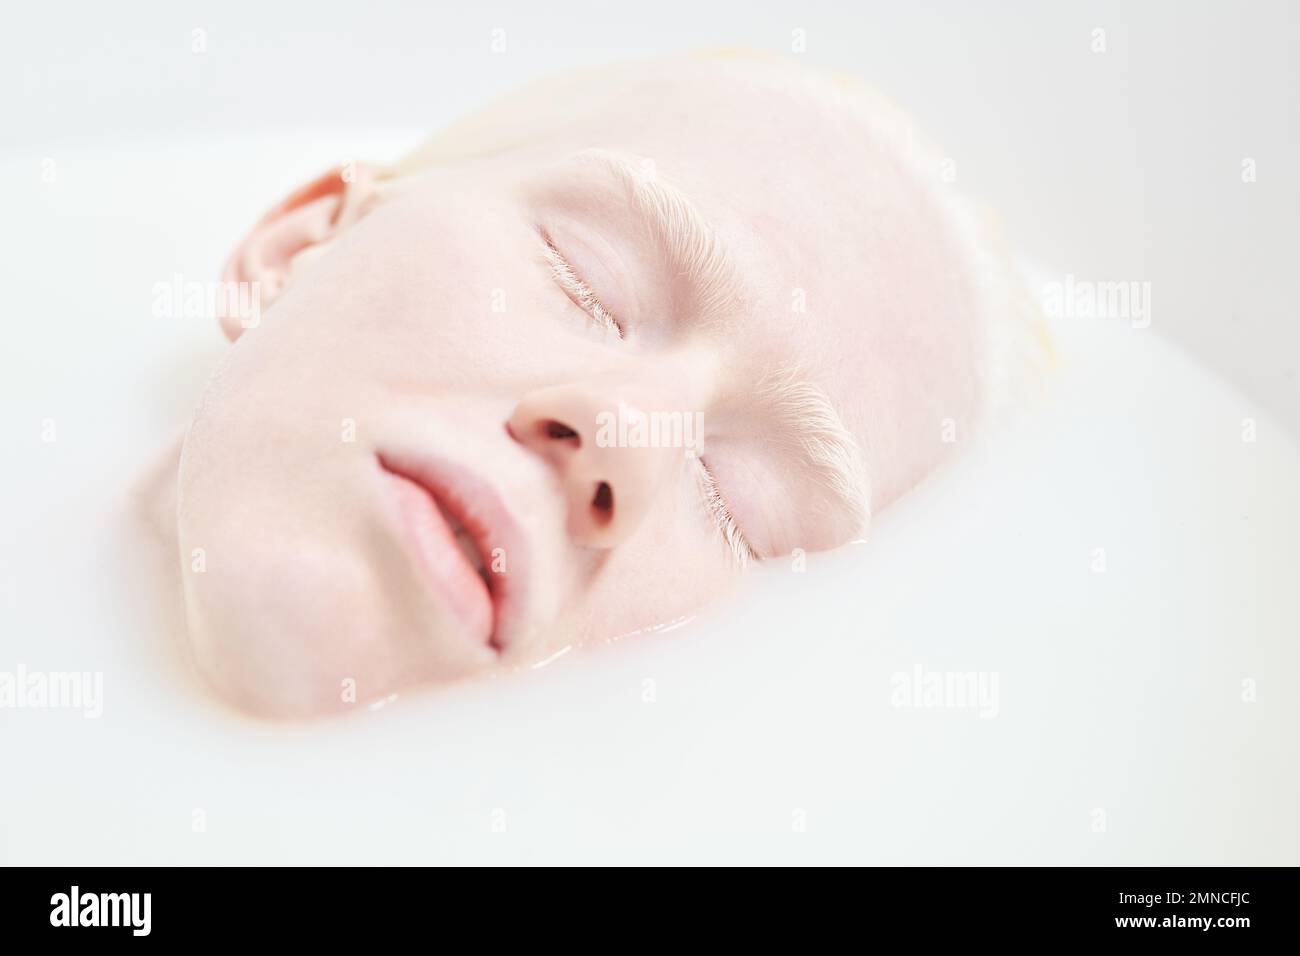 Close-up of pale face of young peaceful or sleeping albino woman lying in bathtub filled with warm water and milk during beauty procedure Stock Photo